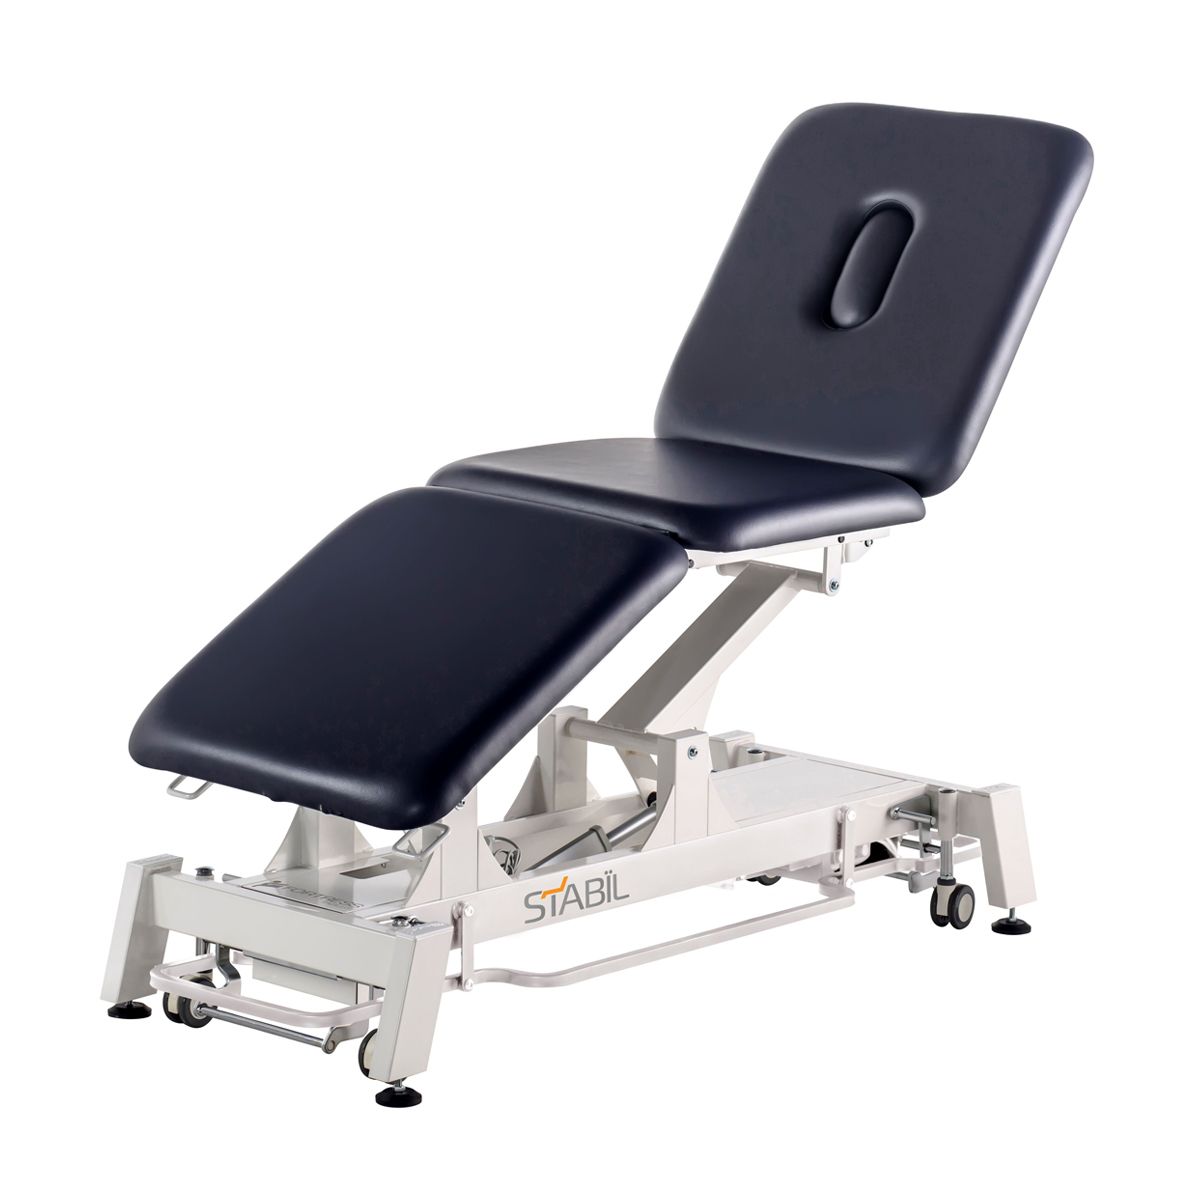 Pro 3-Section Treatment Table - White